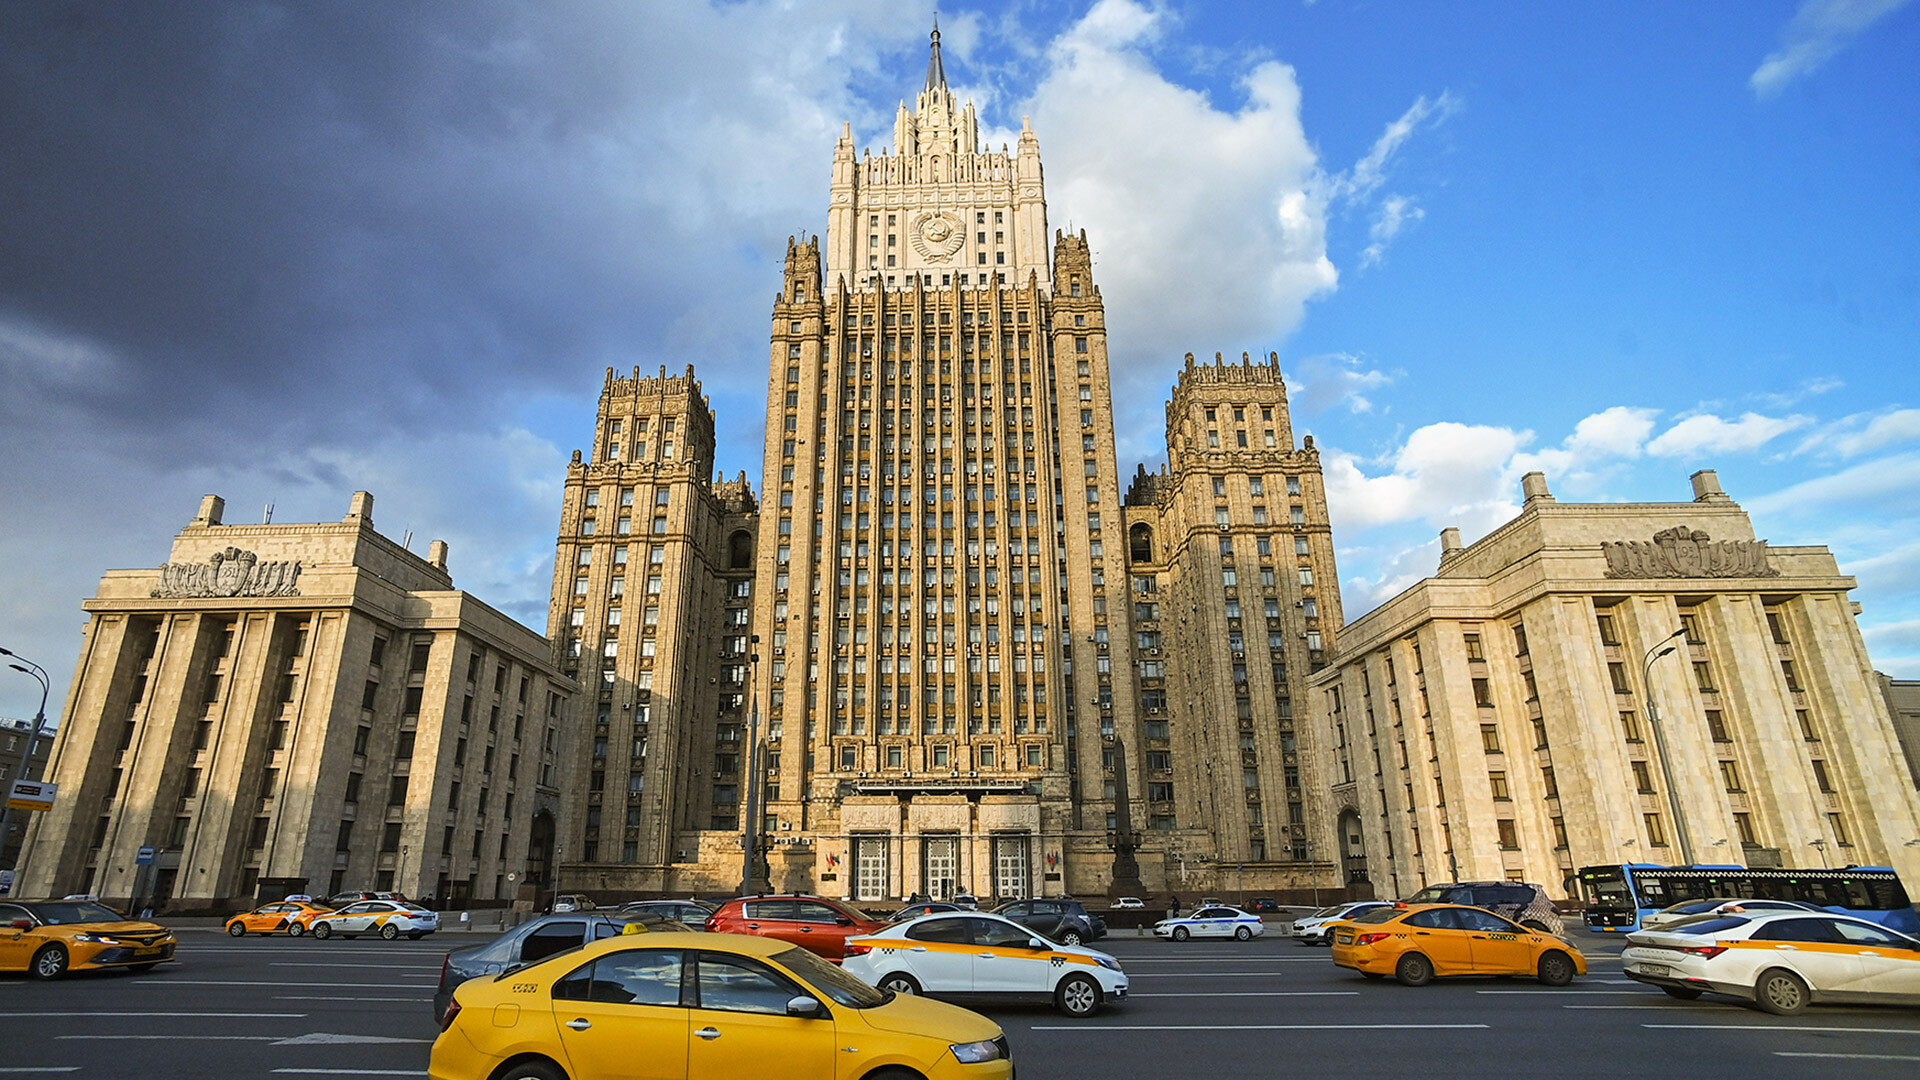 The building of the Russian Ministry of Foreign Affairs in Moscow.